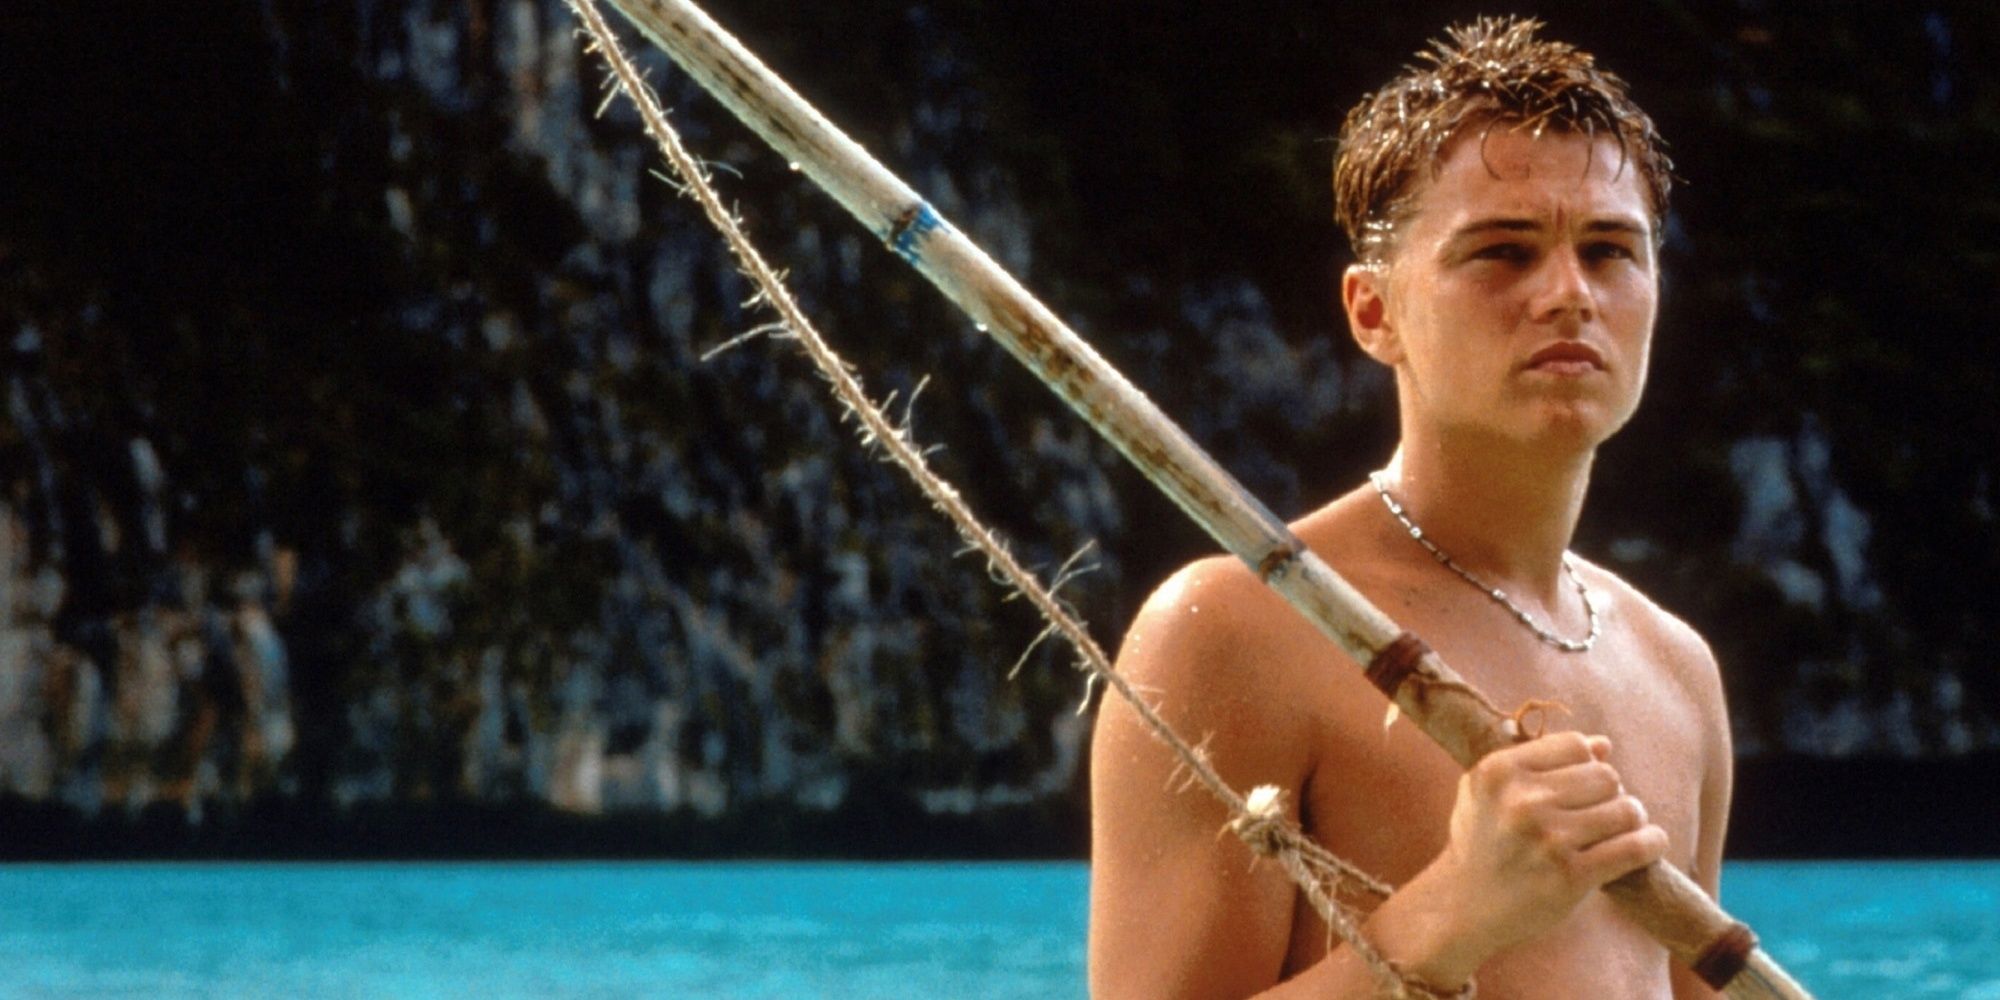 Leonardo DiCaprio with a fishing spear on the beach in The Beach.